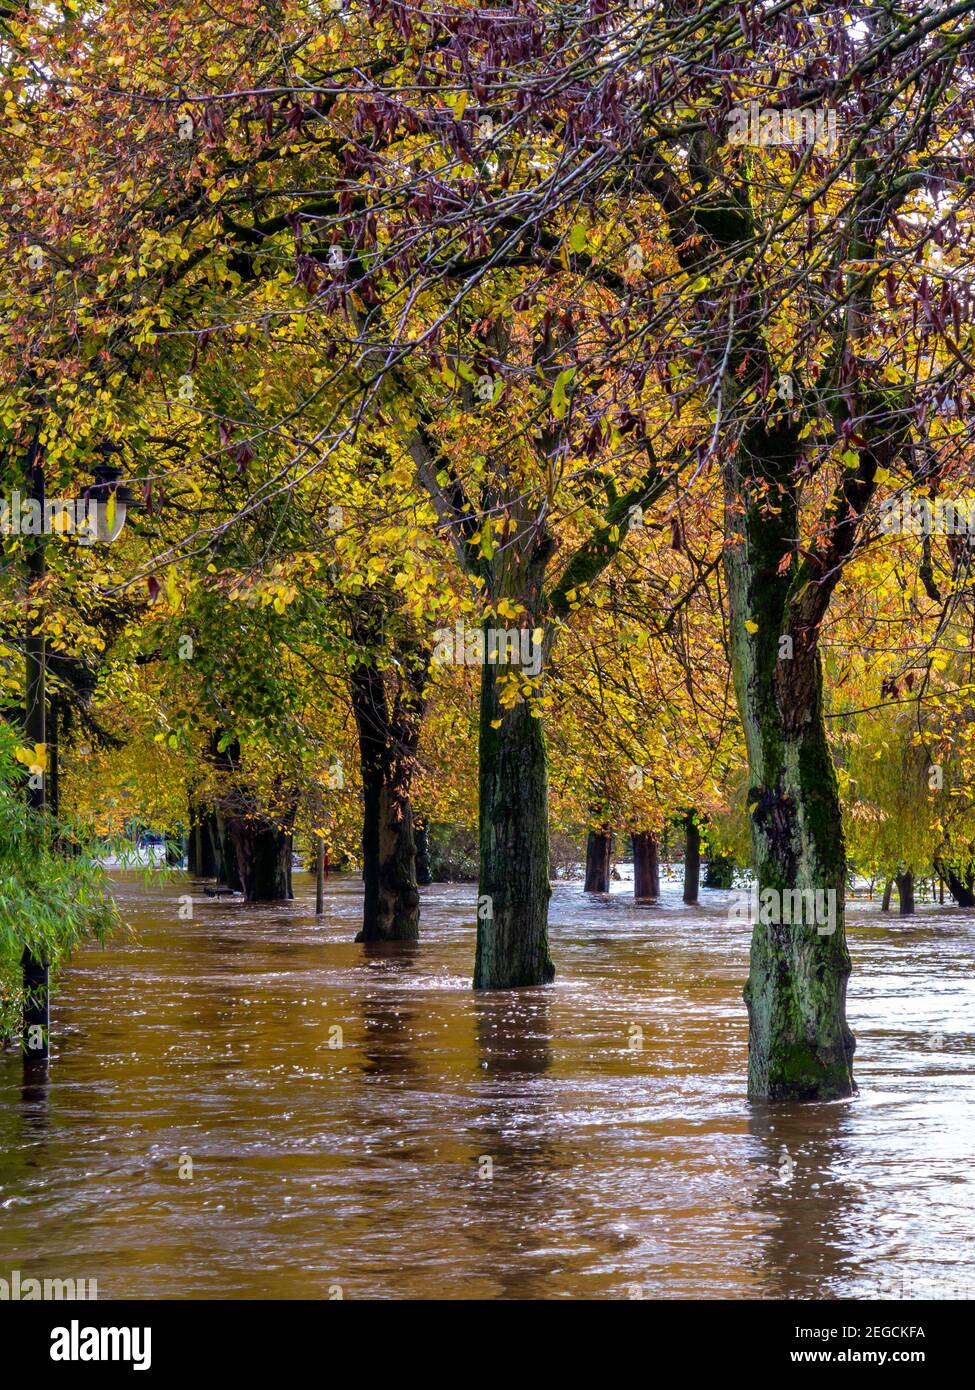 Severe flooding caused by the River Derwent bursting its banks in Hall Leys Park Matlock Derbyshire Peak District England UK in November 2019 Stock Photo